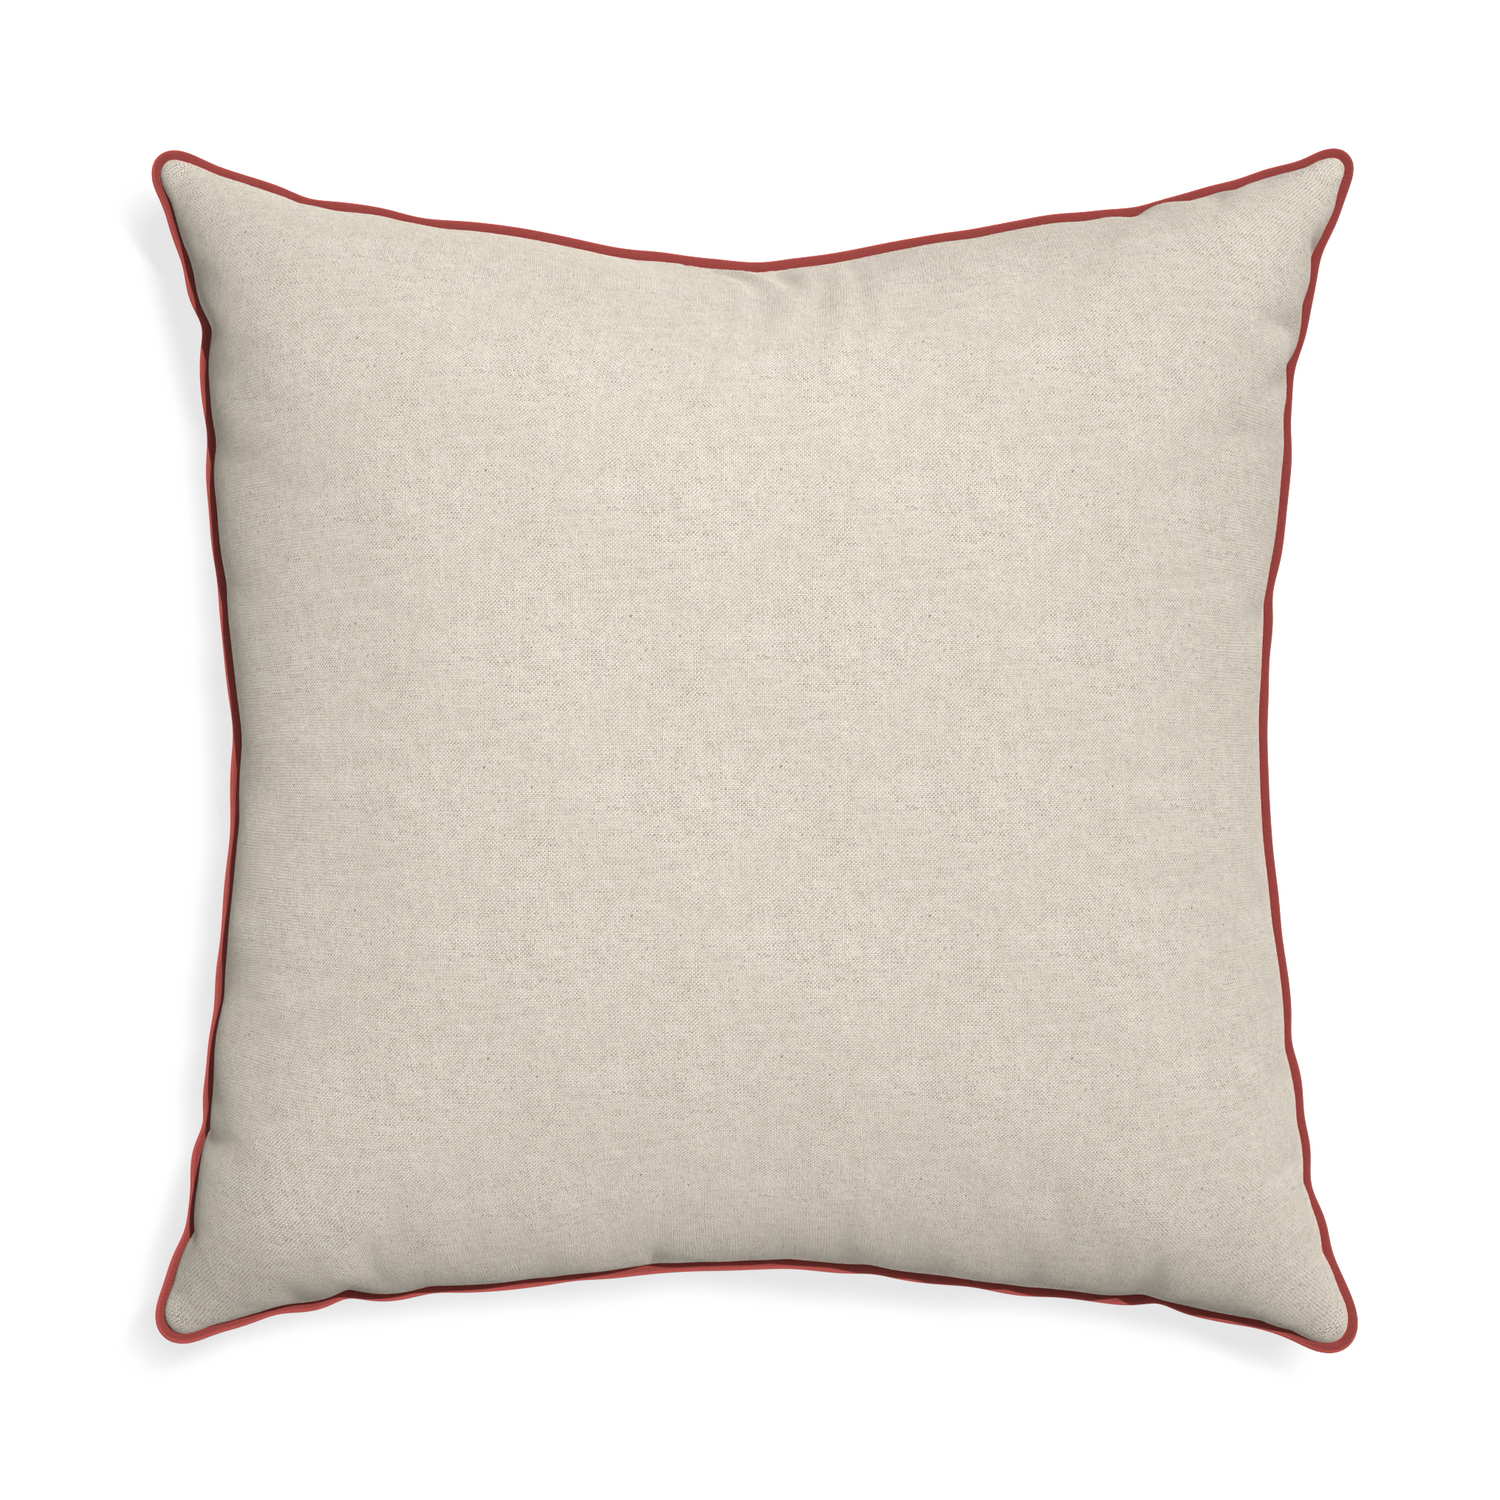 Euro-sham oat custom pillow with c piping on white background